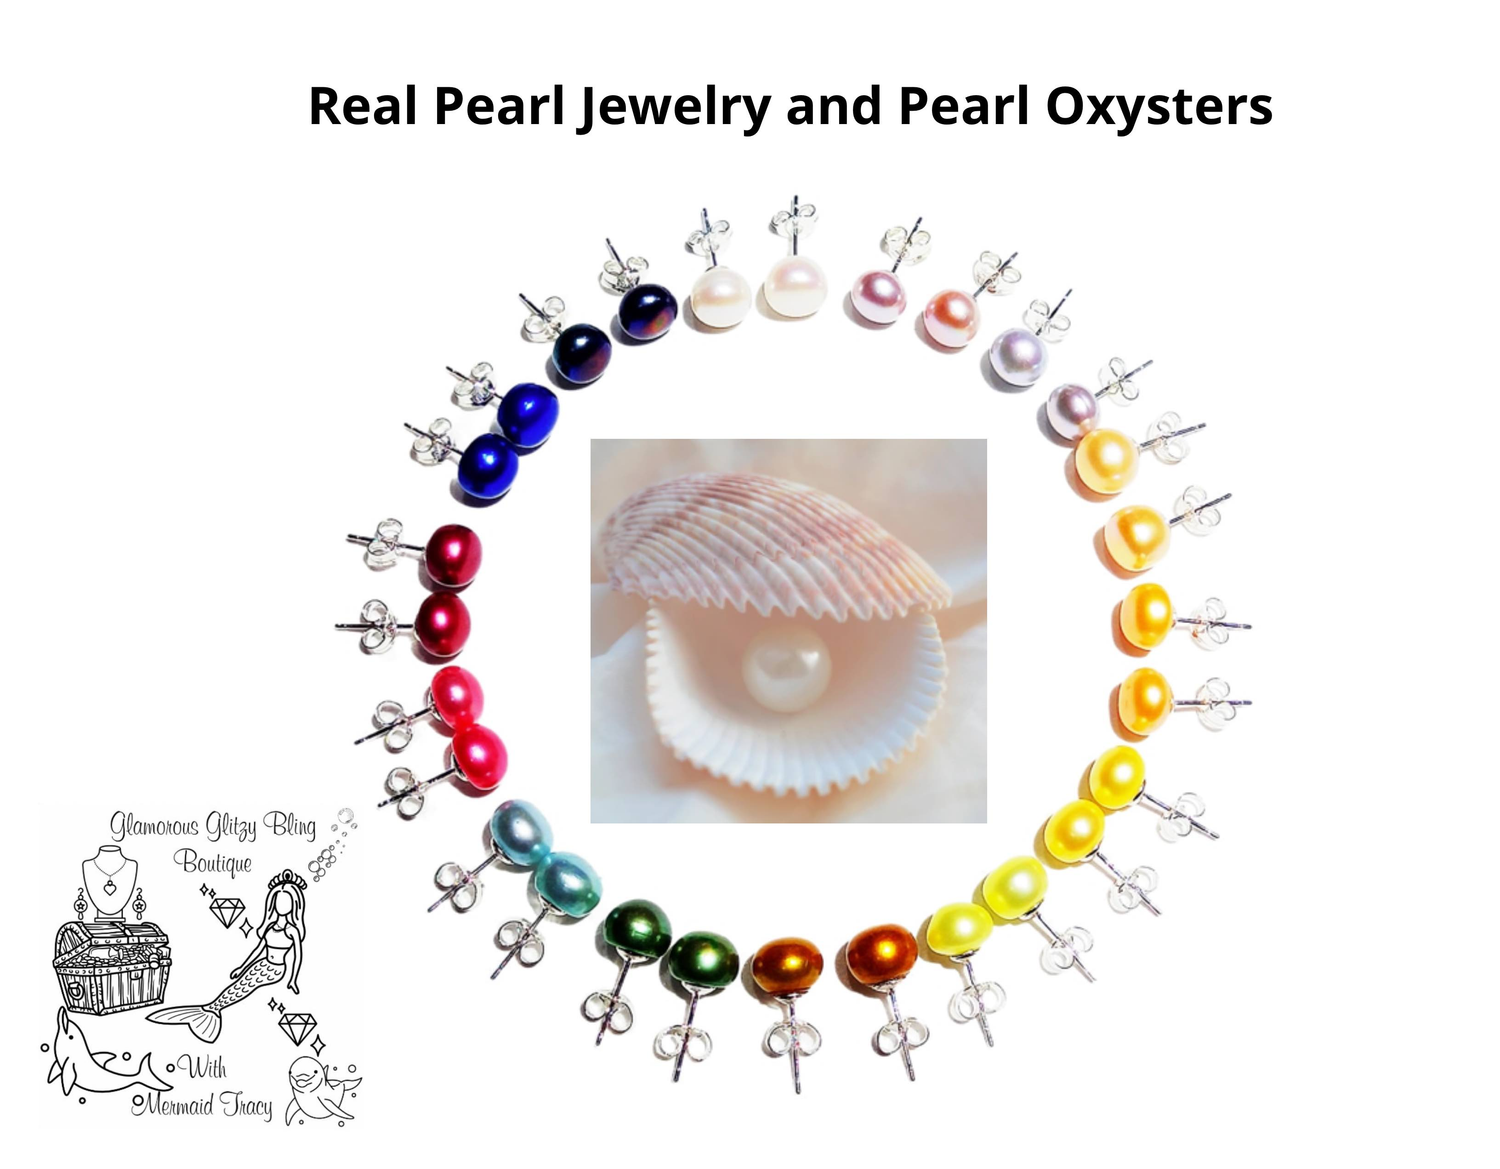 Real Pearl Jewelry and Pearls  in a Oyster